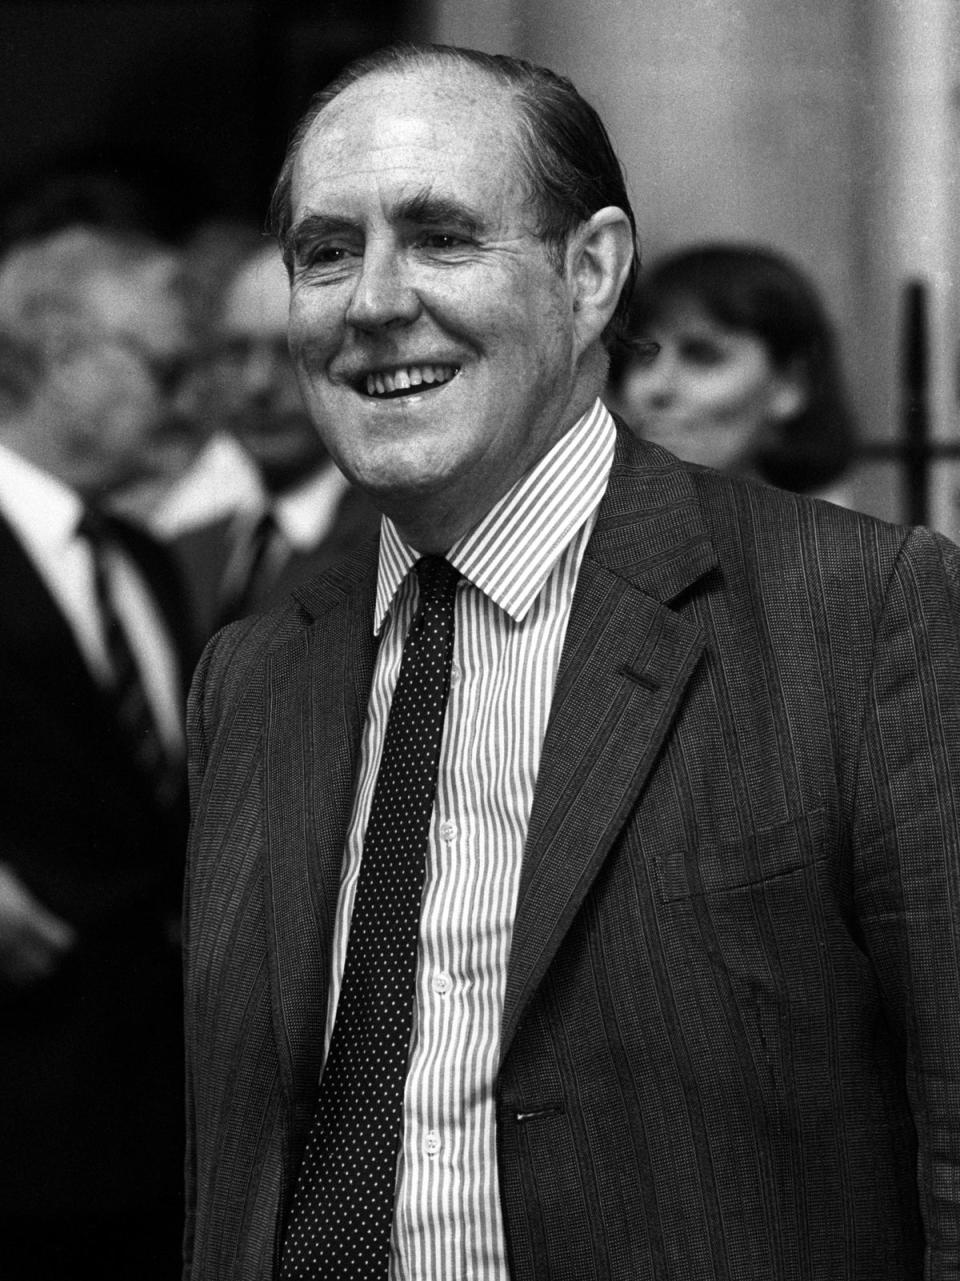 Brooke pictured in August 1989, shortly after being appointed Northern Ireland secretary (PA)